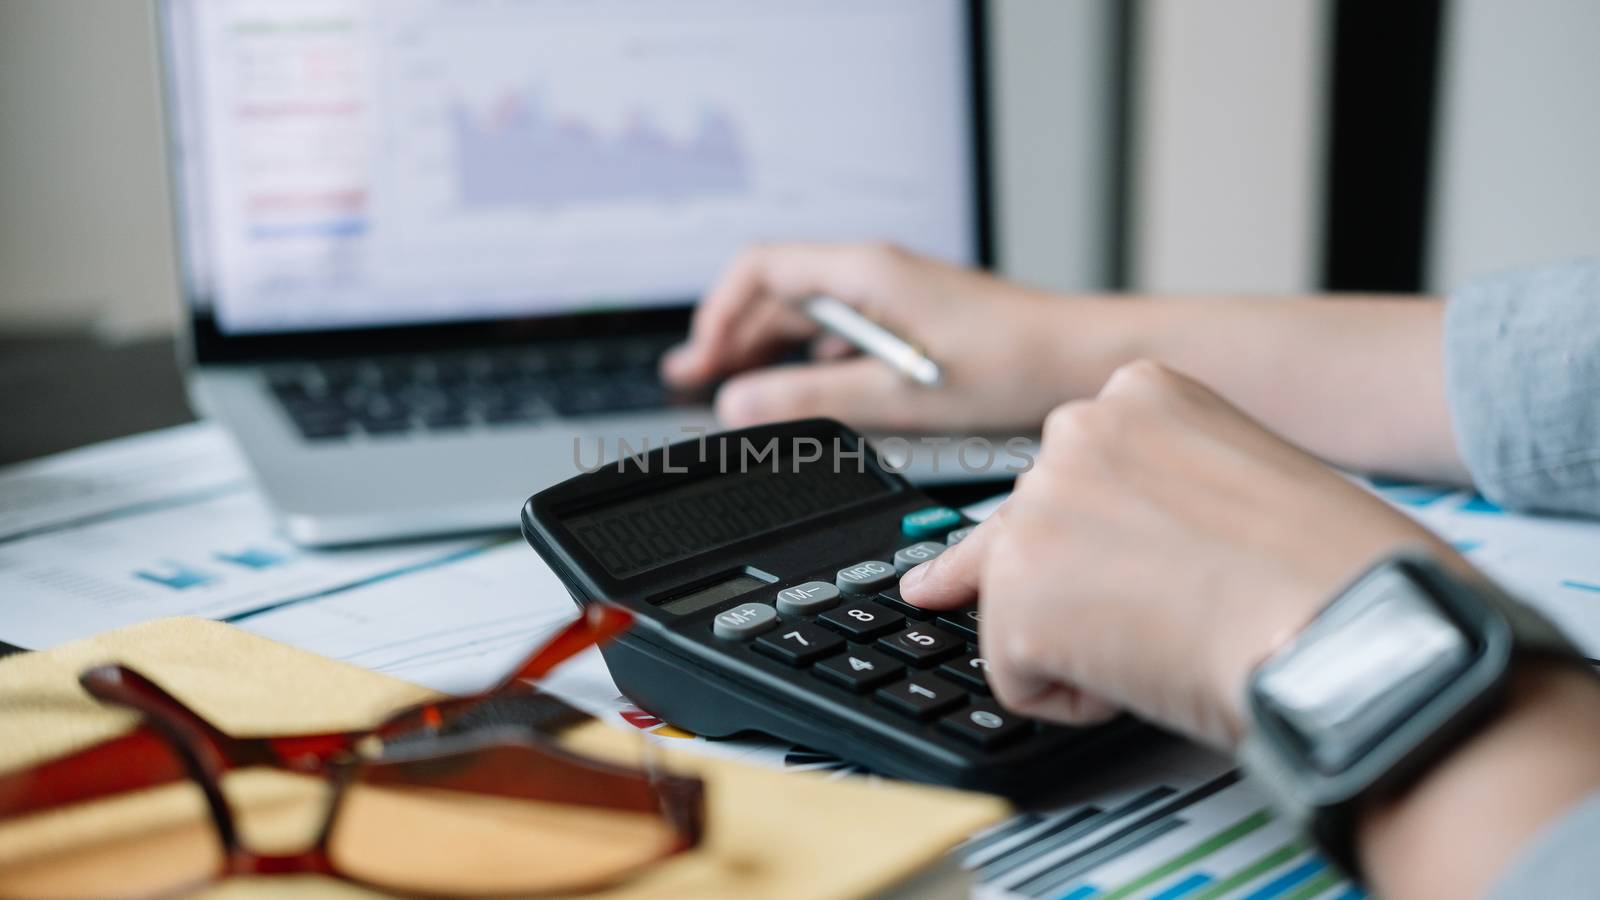 accountant working on desk using calculator for calculate finance report at home.